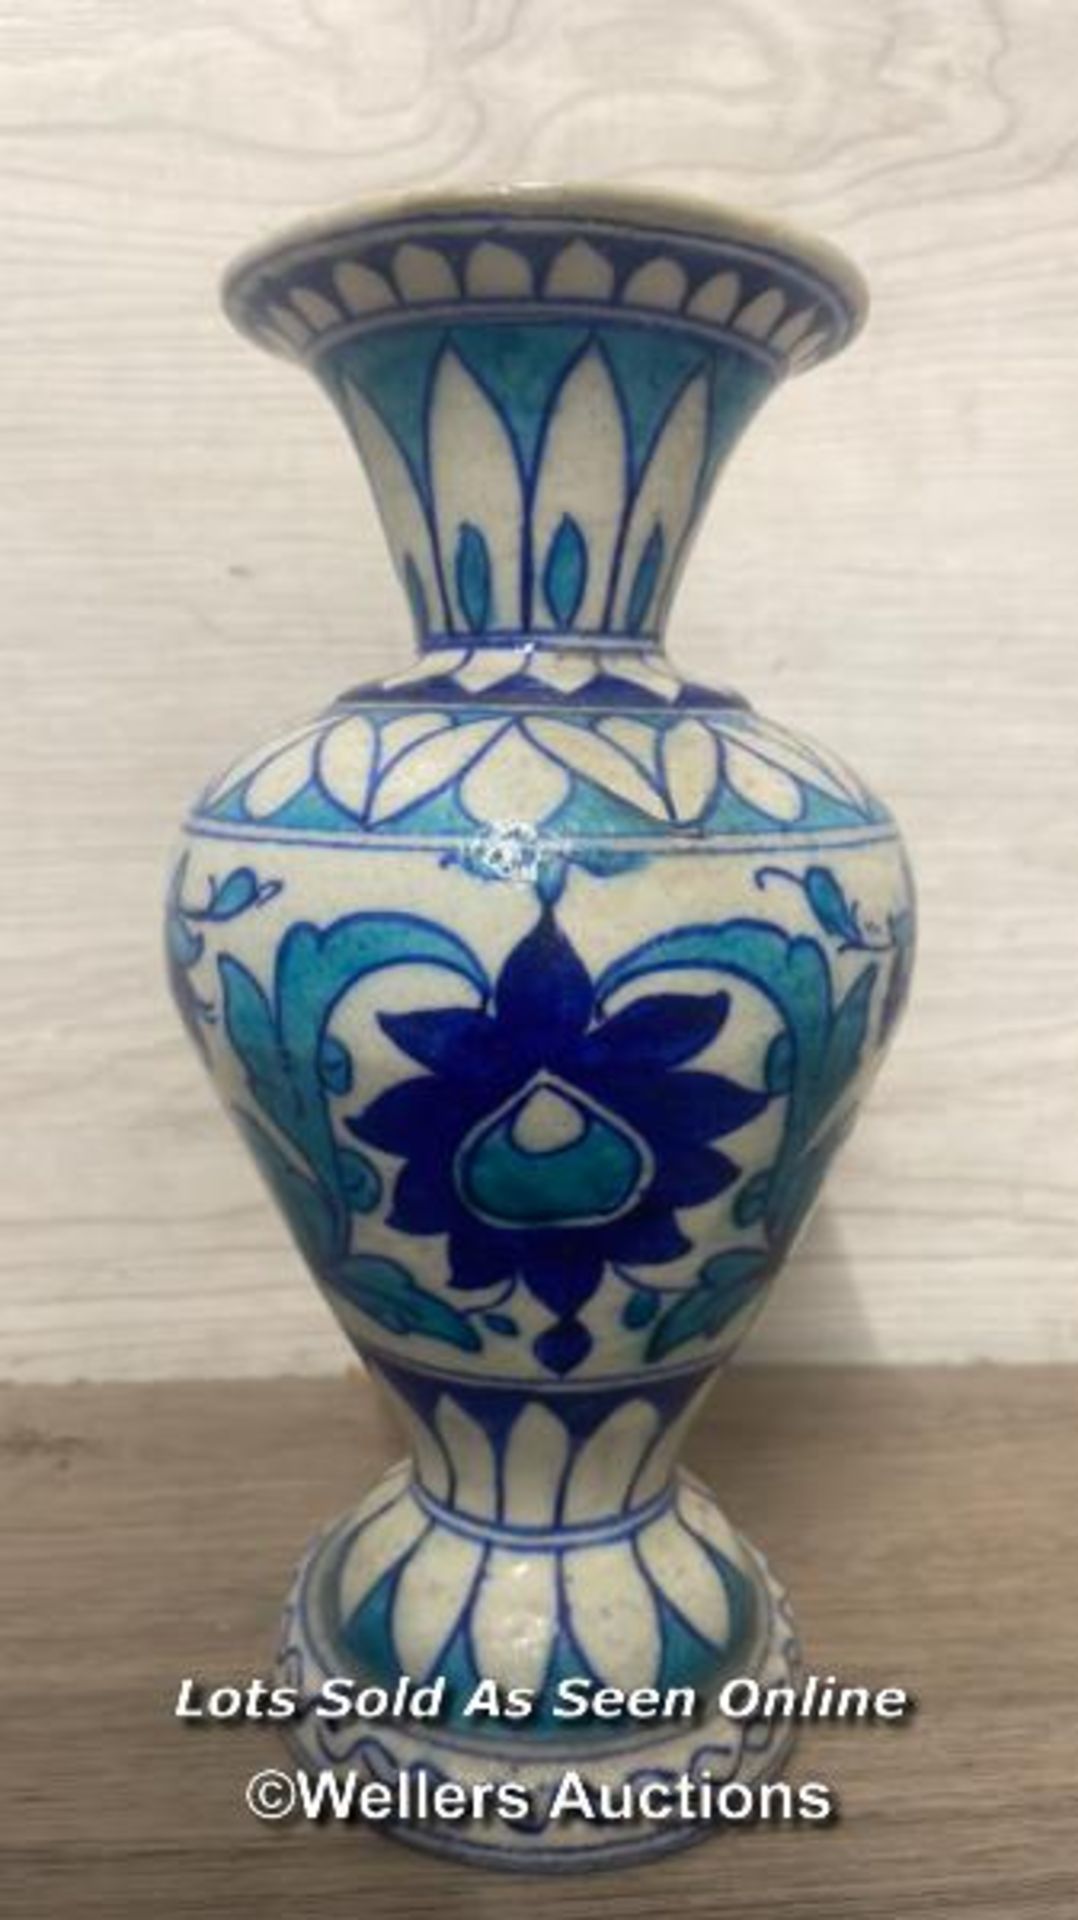 TWO SIMILAR MULTAN POTTERY VASES FROM PAKISTAN, HAND PAINTED BLUE & TURQUOISE FOLIAGE AND FLOWER - Image 9 of 15